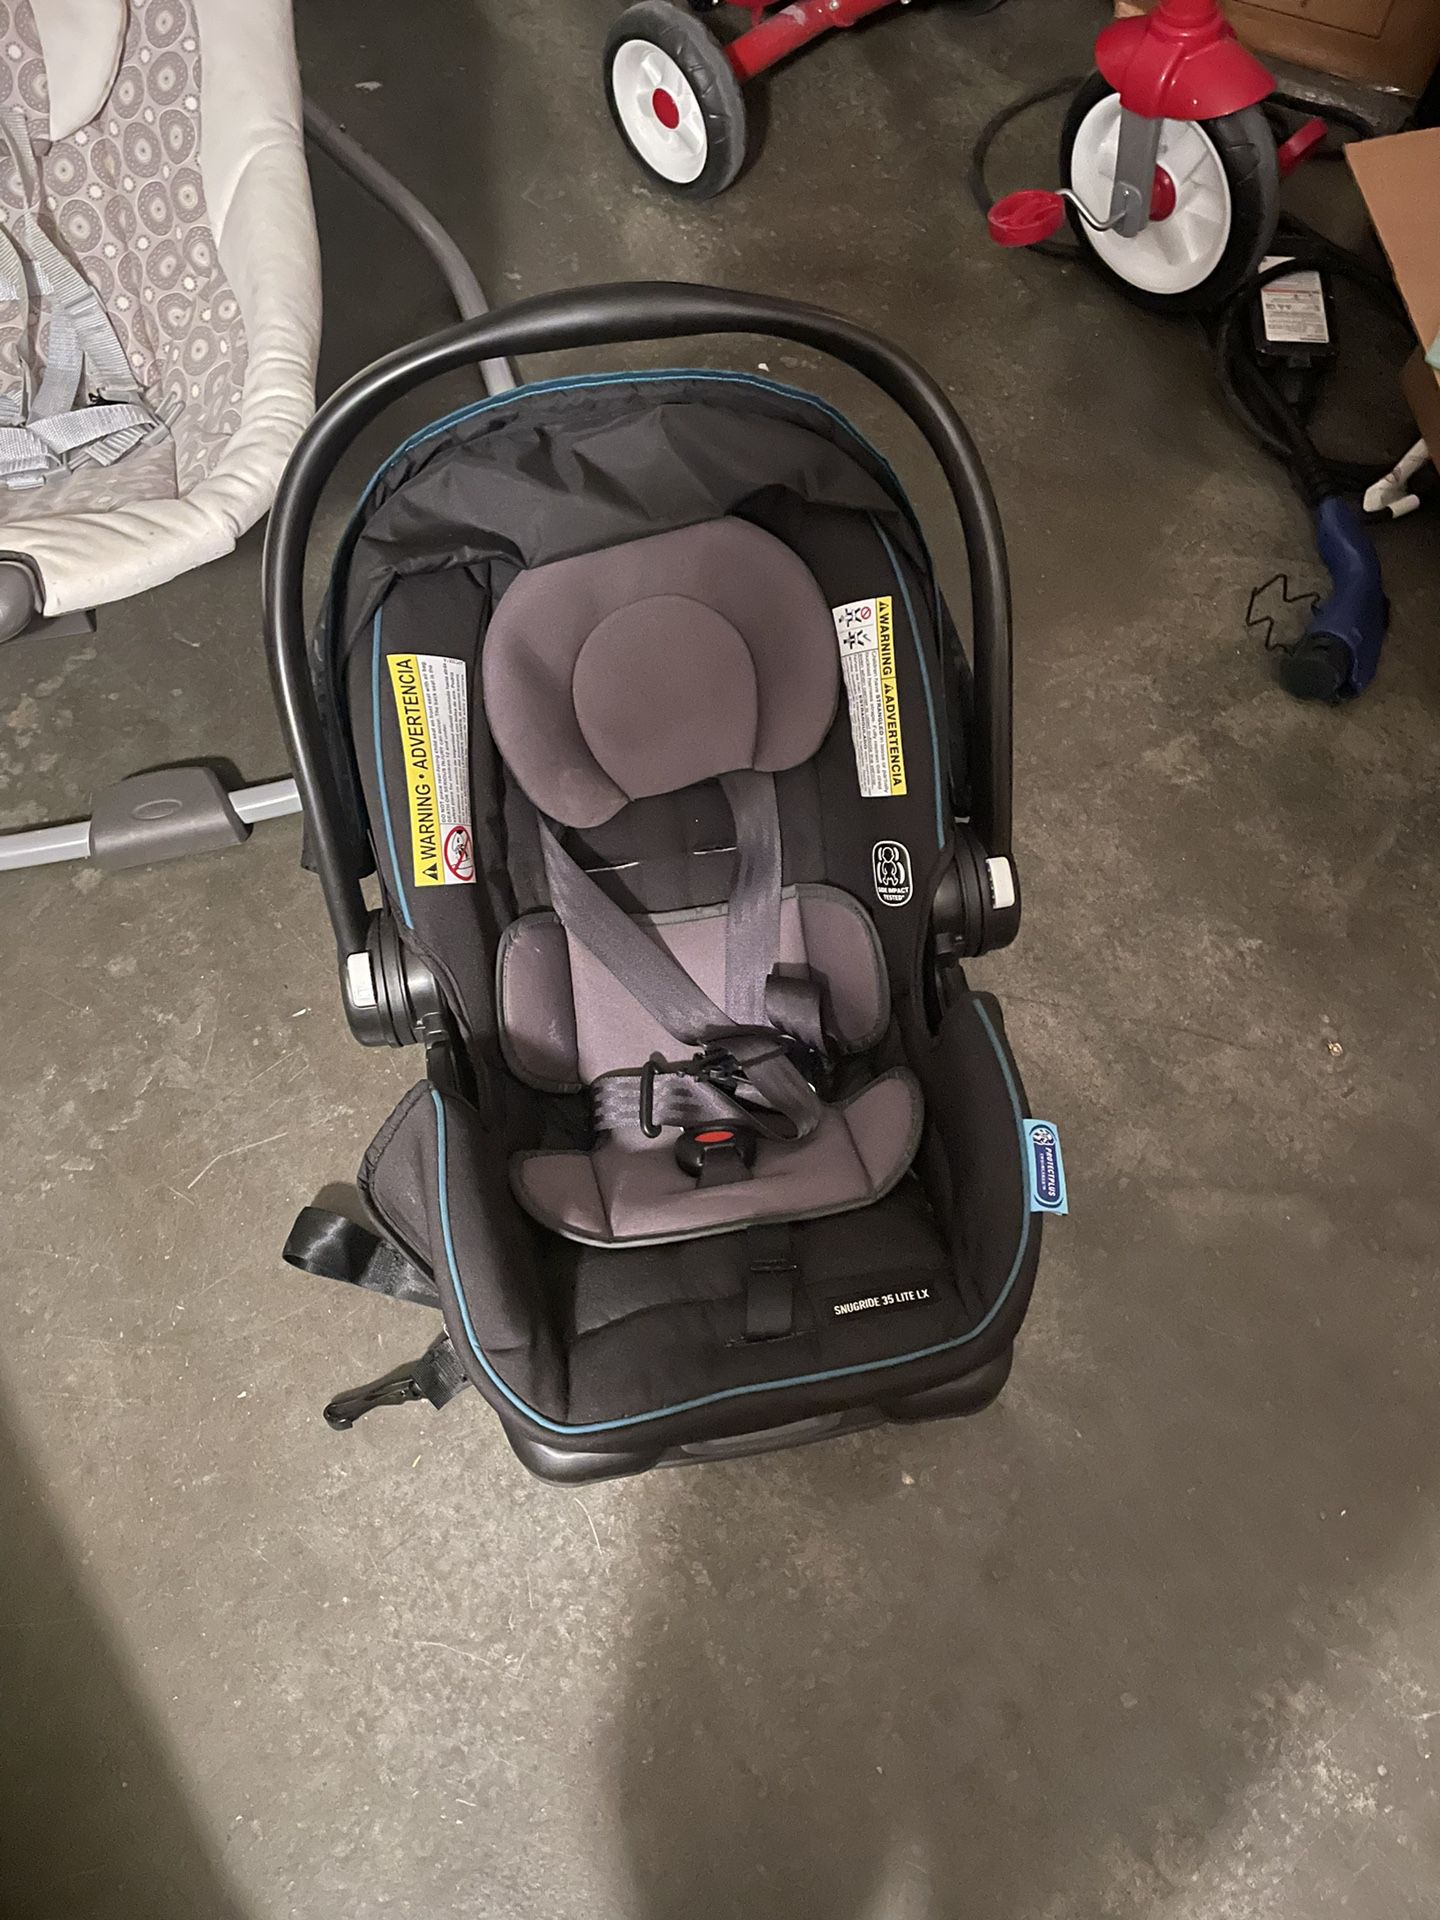 Graco Snugride 35 Lite LX Baby Car Seat, Graco Baby Swing And Two Other Baby Chairs